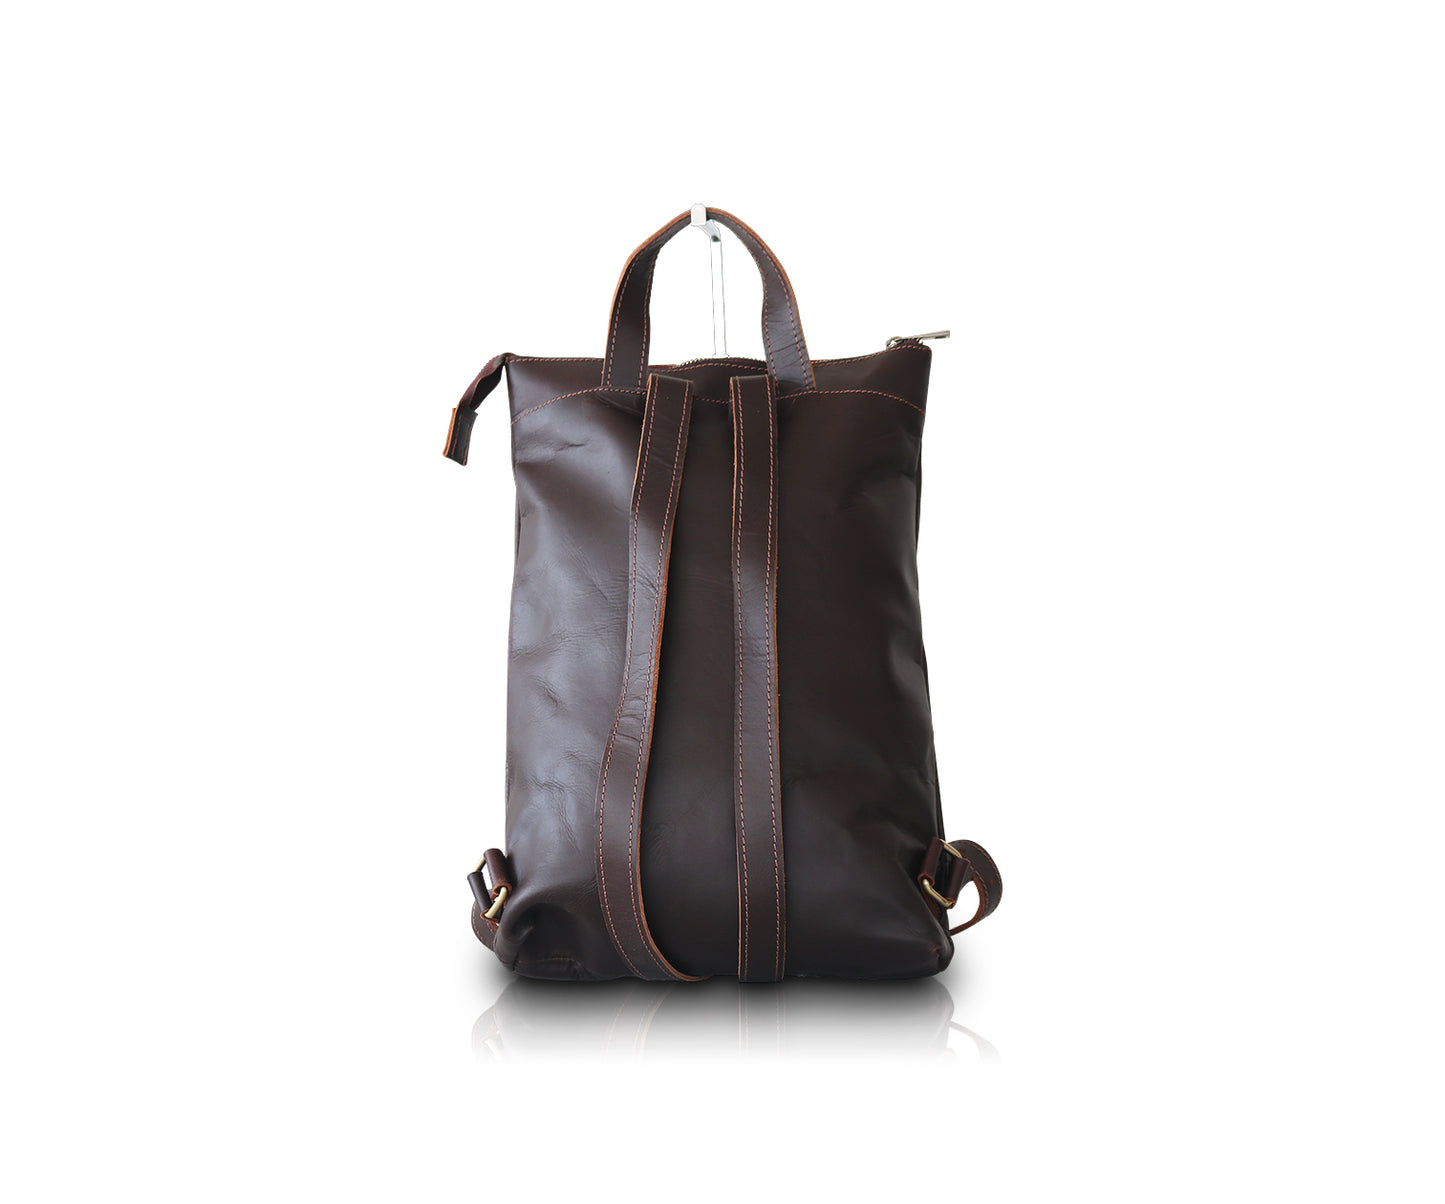 Load image into Gallery viewer, Leather Lightweight Backpack Purse | Dark Brown
